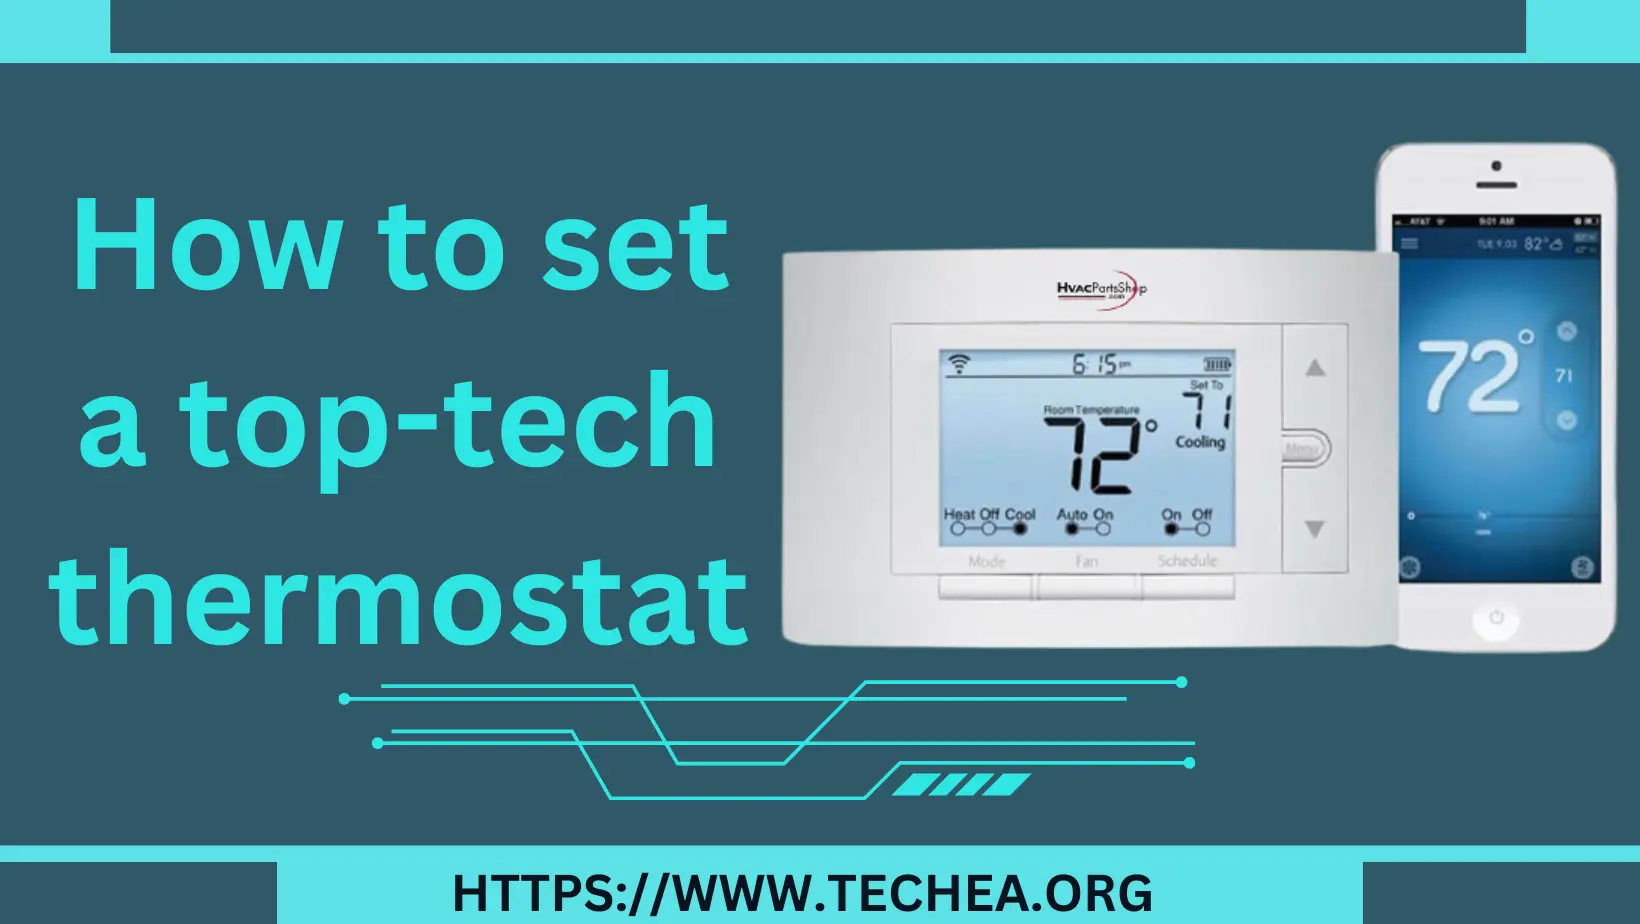 How to set a top-tech thermostat